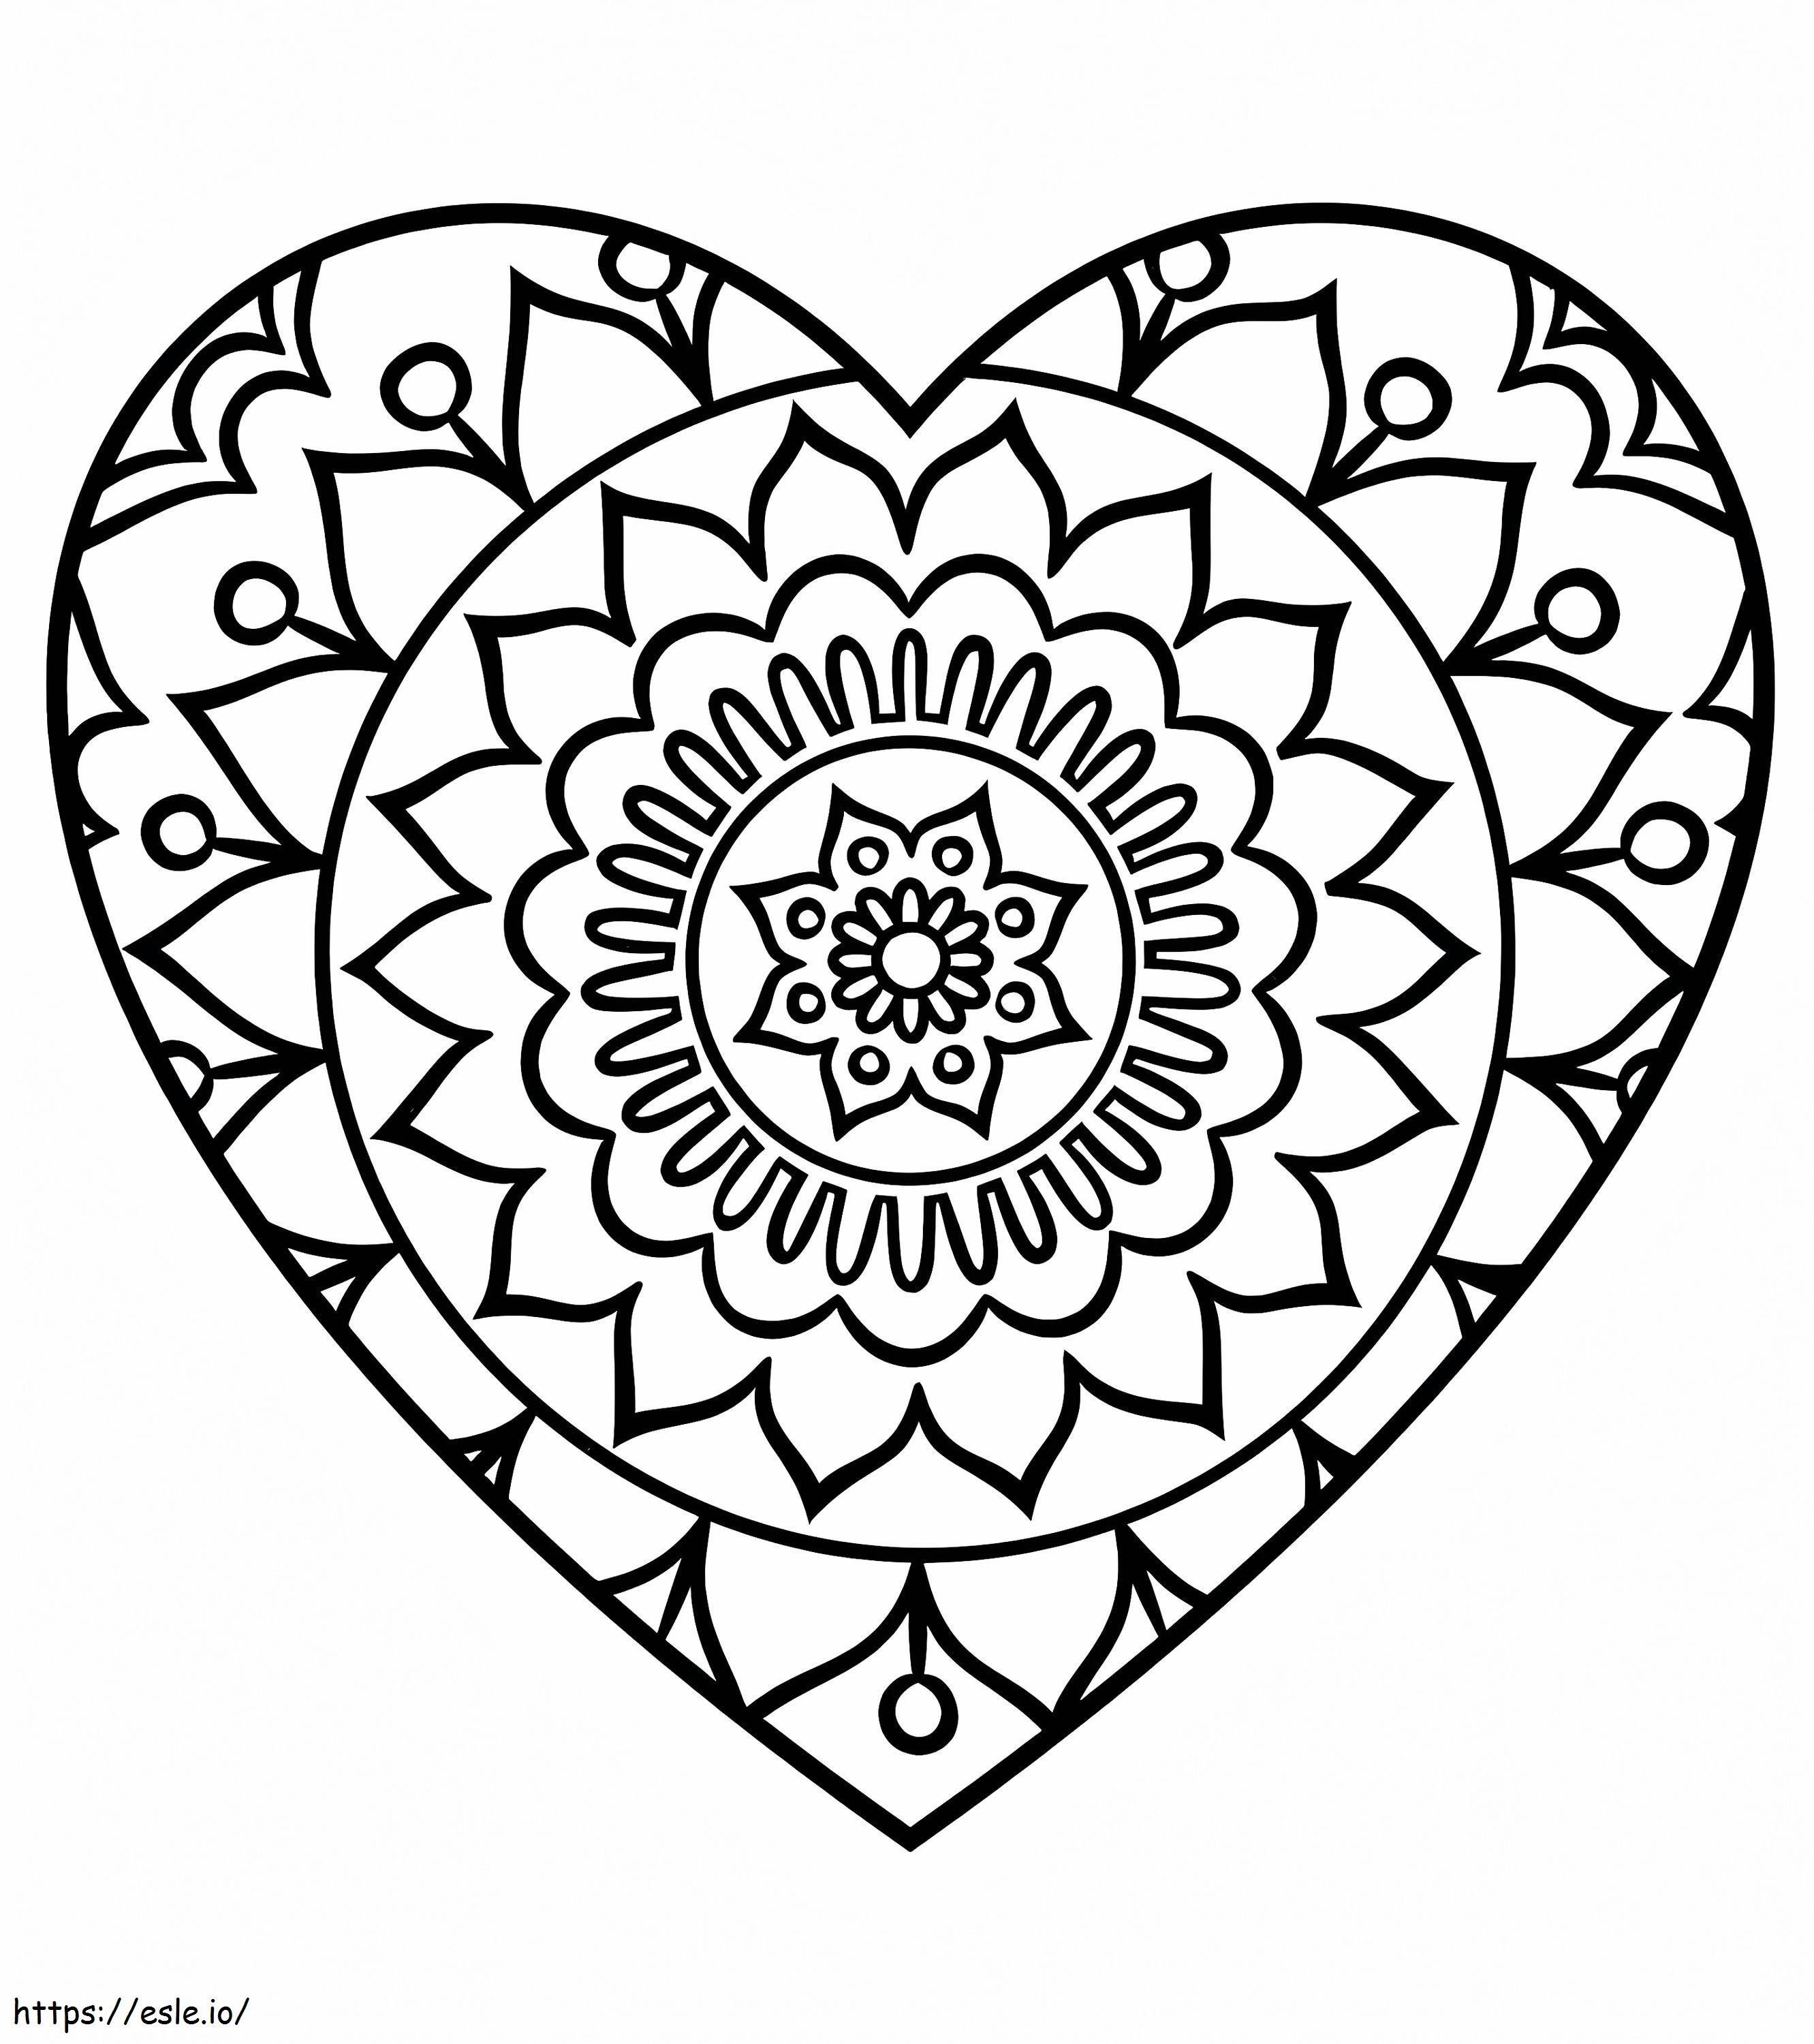 Simple Heart Mandala Coloring Page coloring page